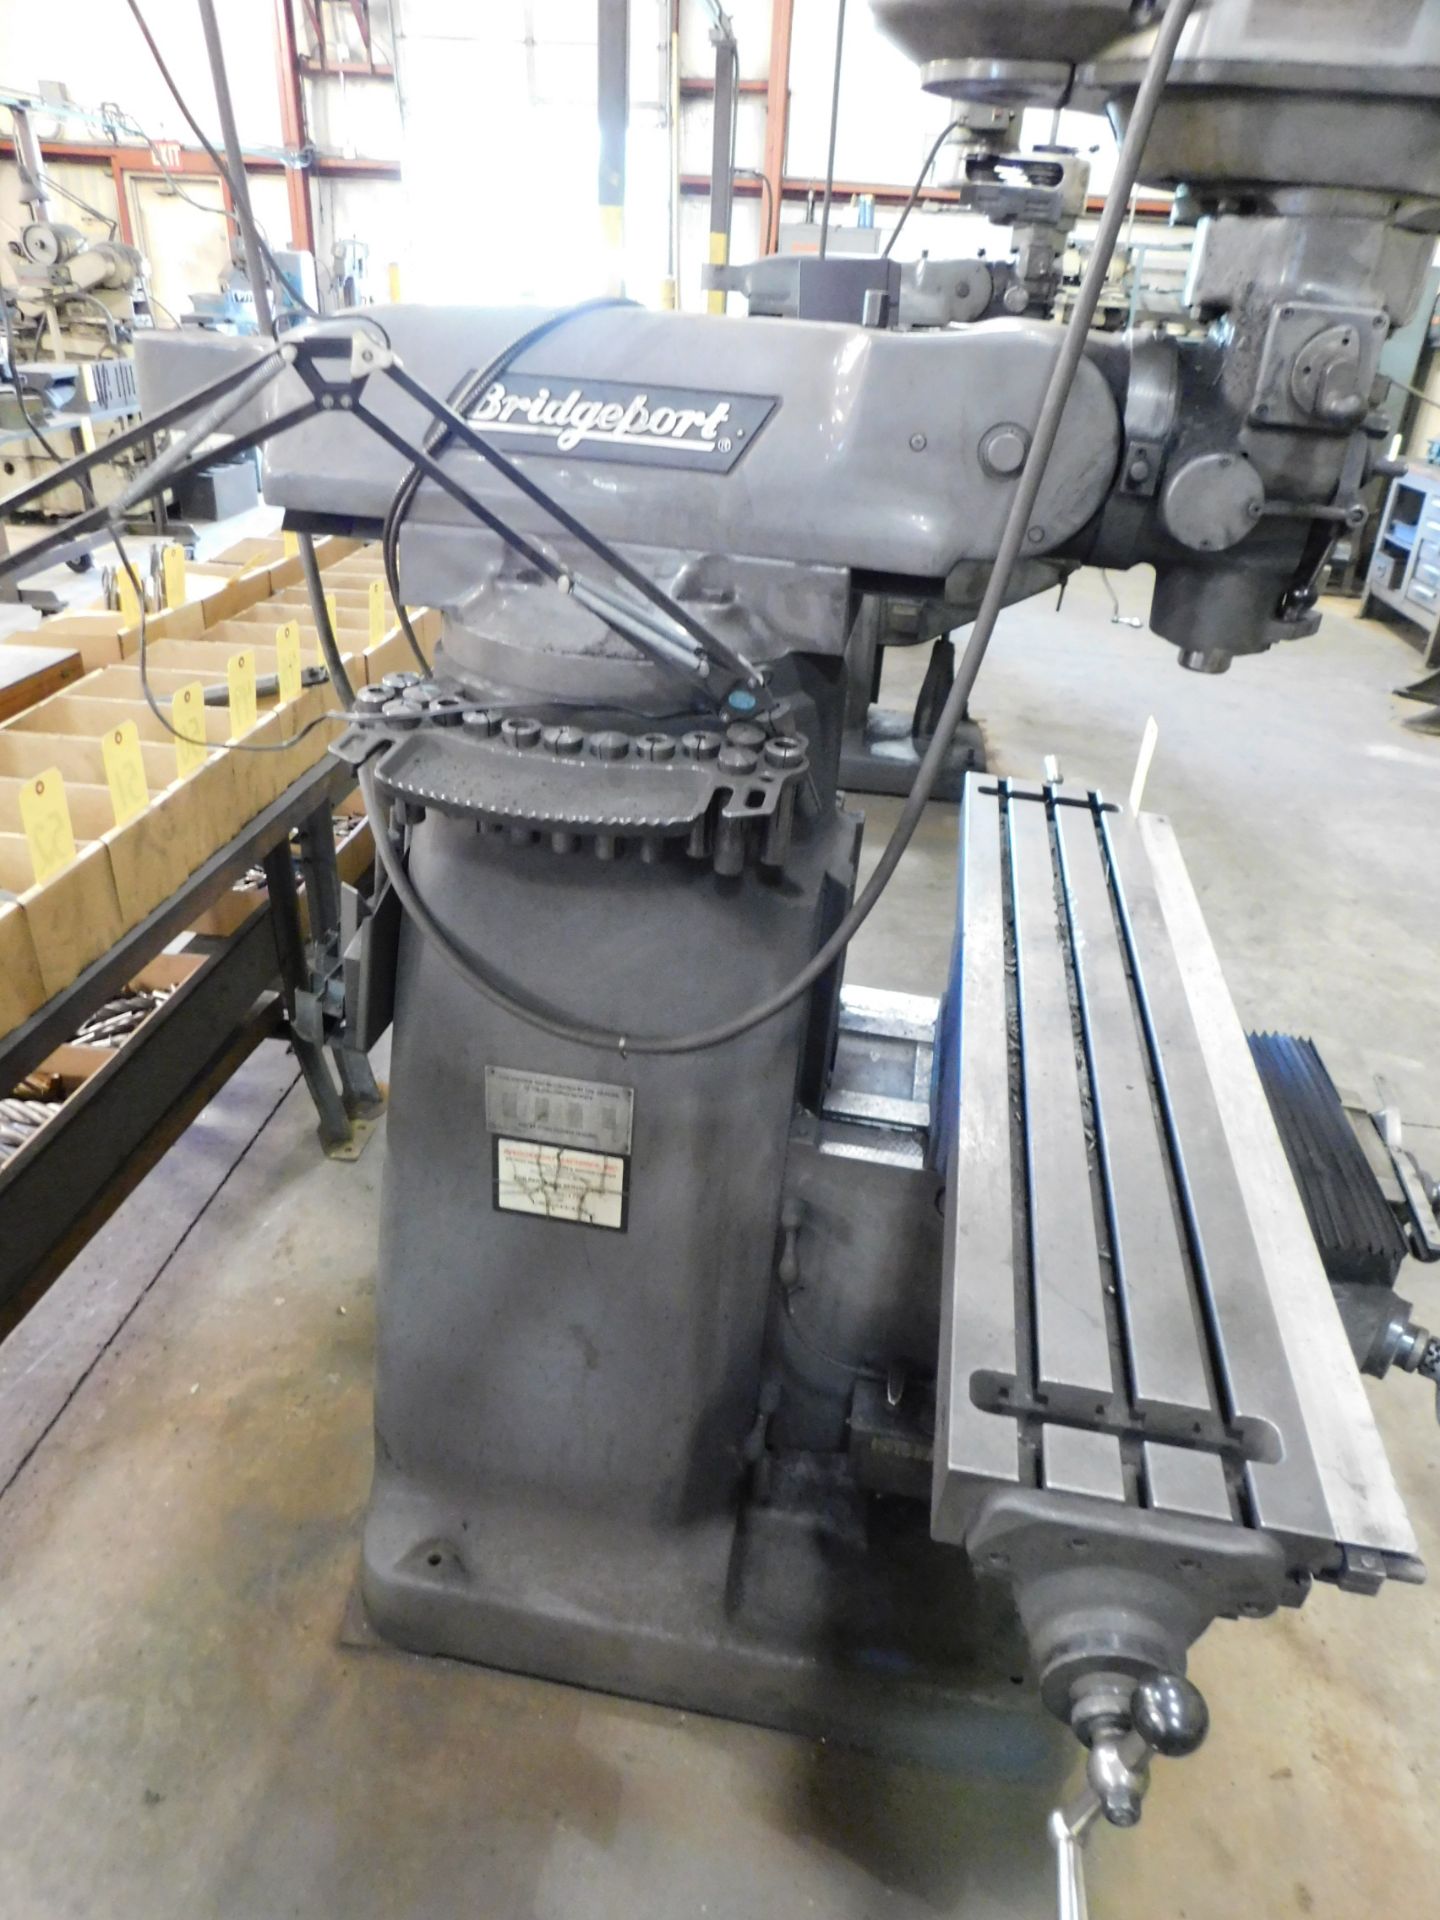 Bridgeport Series I, 2 HP Vertical Mill, s/n BR273024, 9” X 48” Table, Newall D.R.O. - Image 5 of 9